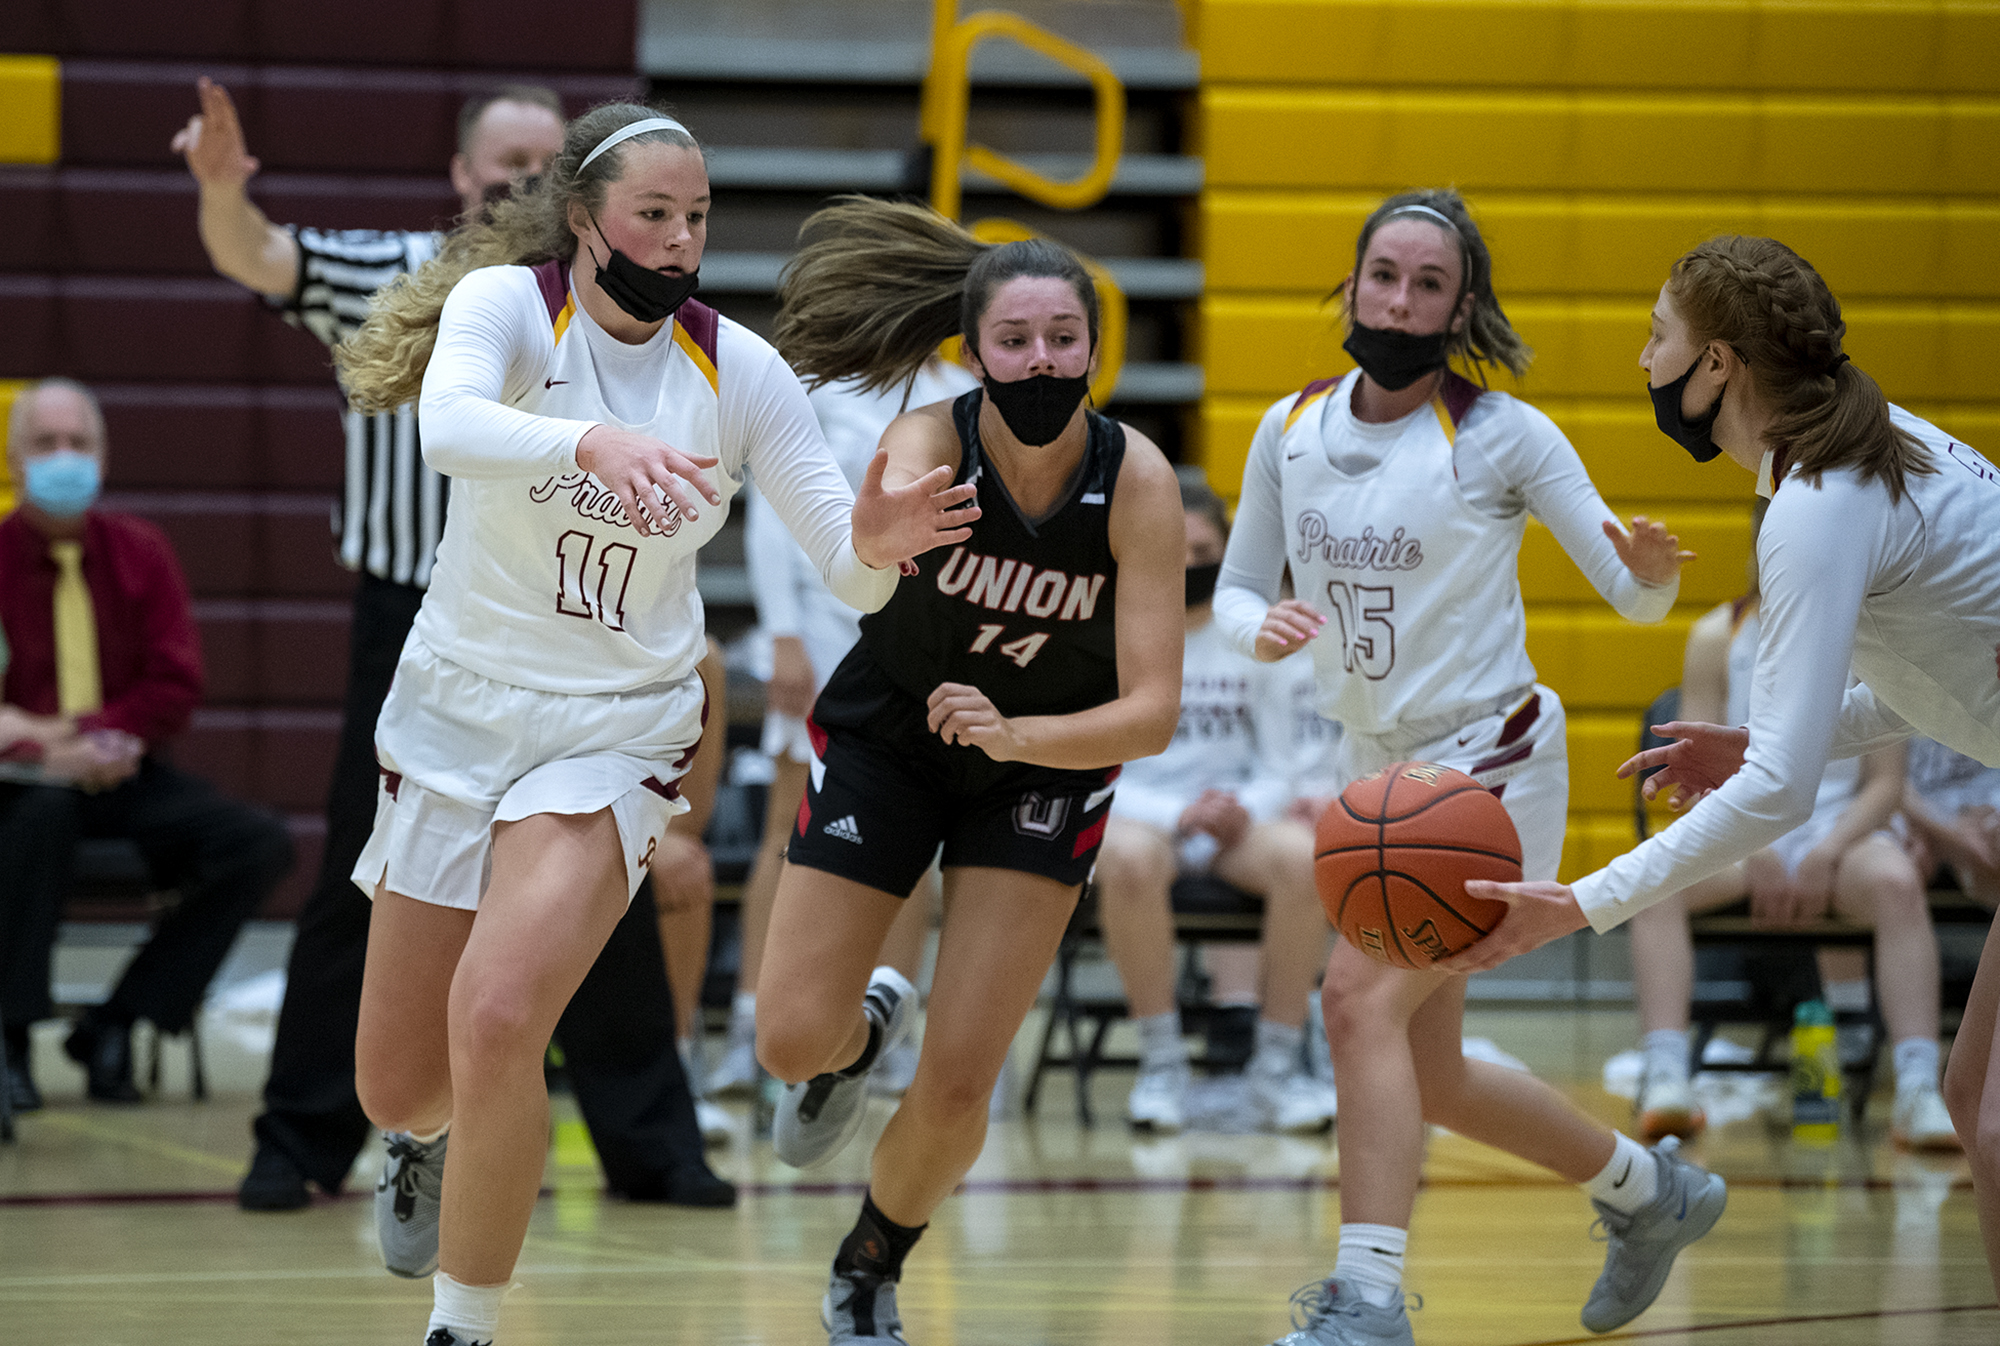 Prairie’s Claire Heitschmidt fights off the defense of Union’s Kaneyl Carpenter to get a handoff from Kaitlyn Caughey in a 4A/3A Greater St. Helens League girls basketball game on Thursday, April 22, 2021, at Prairie High School. Union won 50-46.